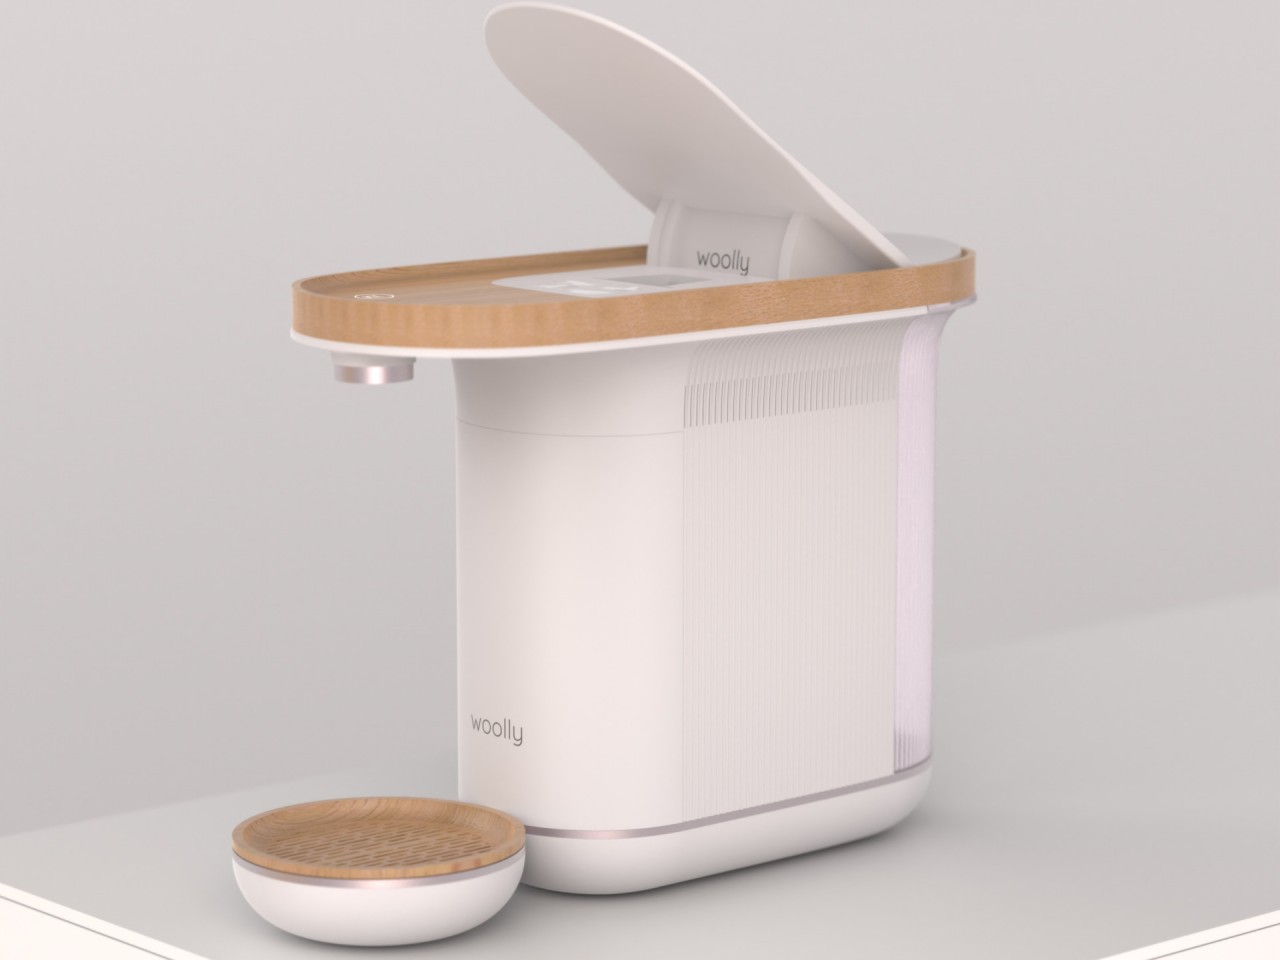 https://www.yankodesign.com/images/design_news/2023/04/capsule-coffee-machine-concept-adds-a-sense-of-warmth-to-your-daily-brew/wolly-coffe-machine-concept-14.jpg